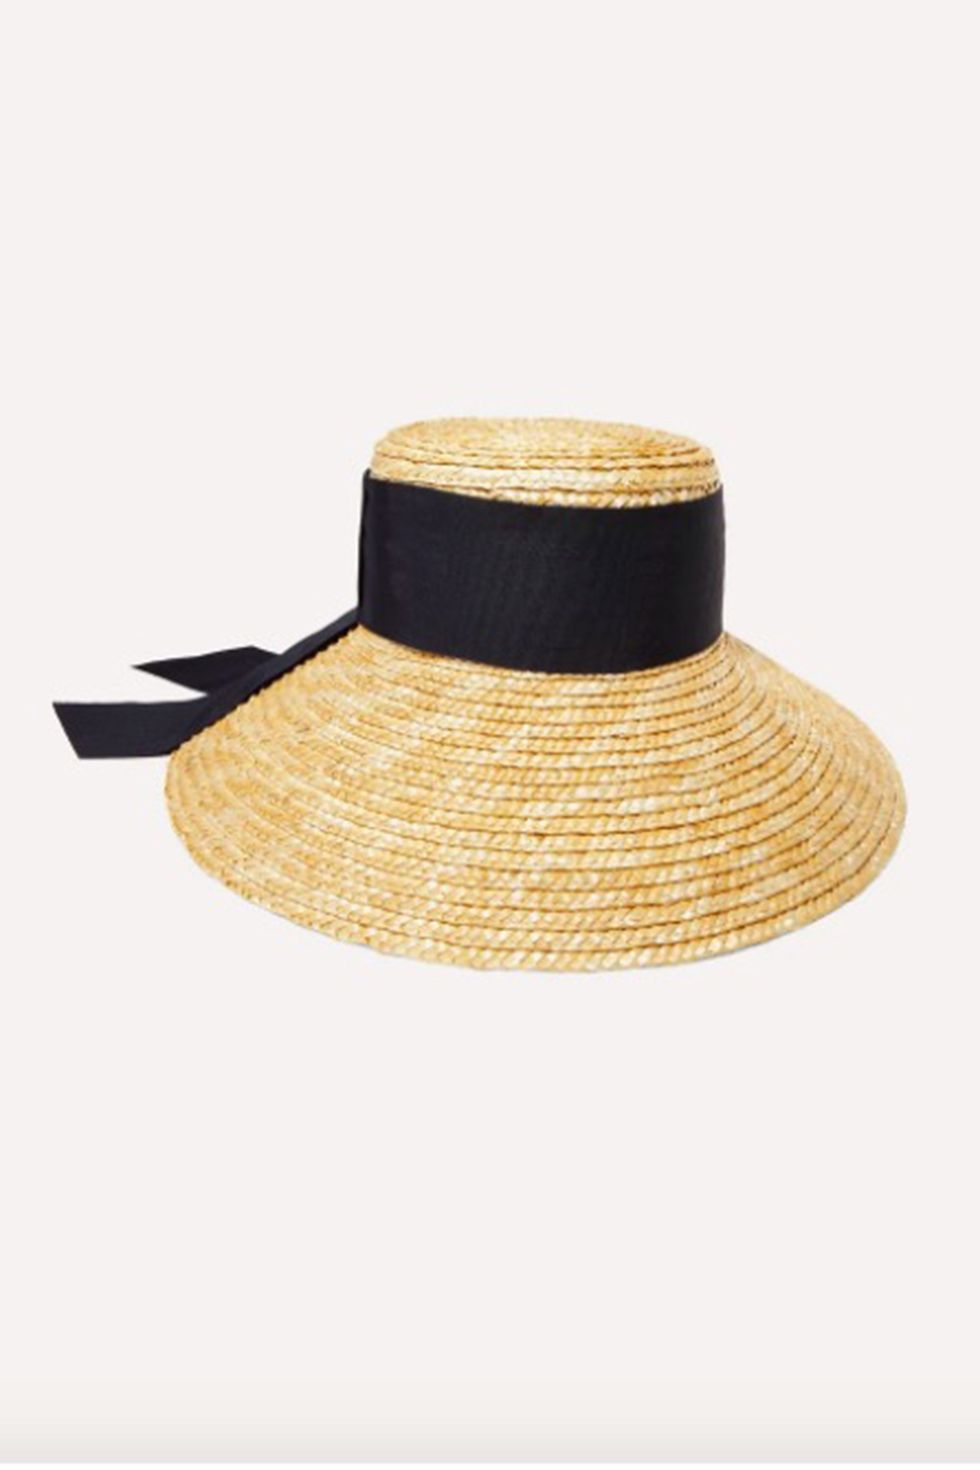 The Best Dramatic Straw Hats for Summer - Closet Confections